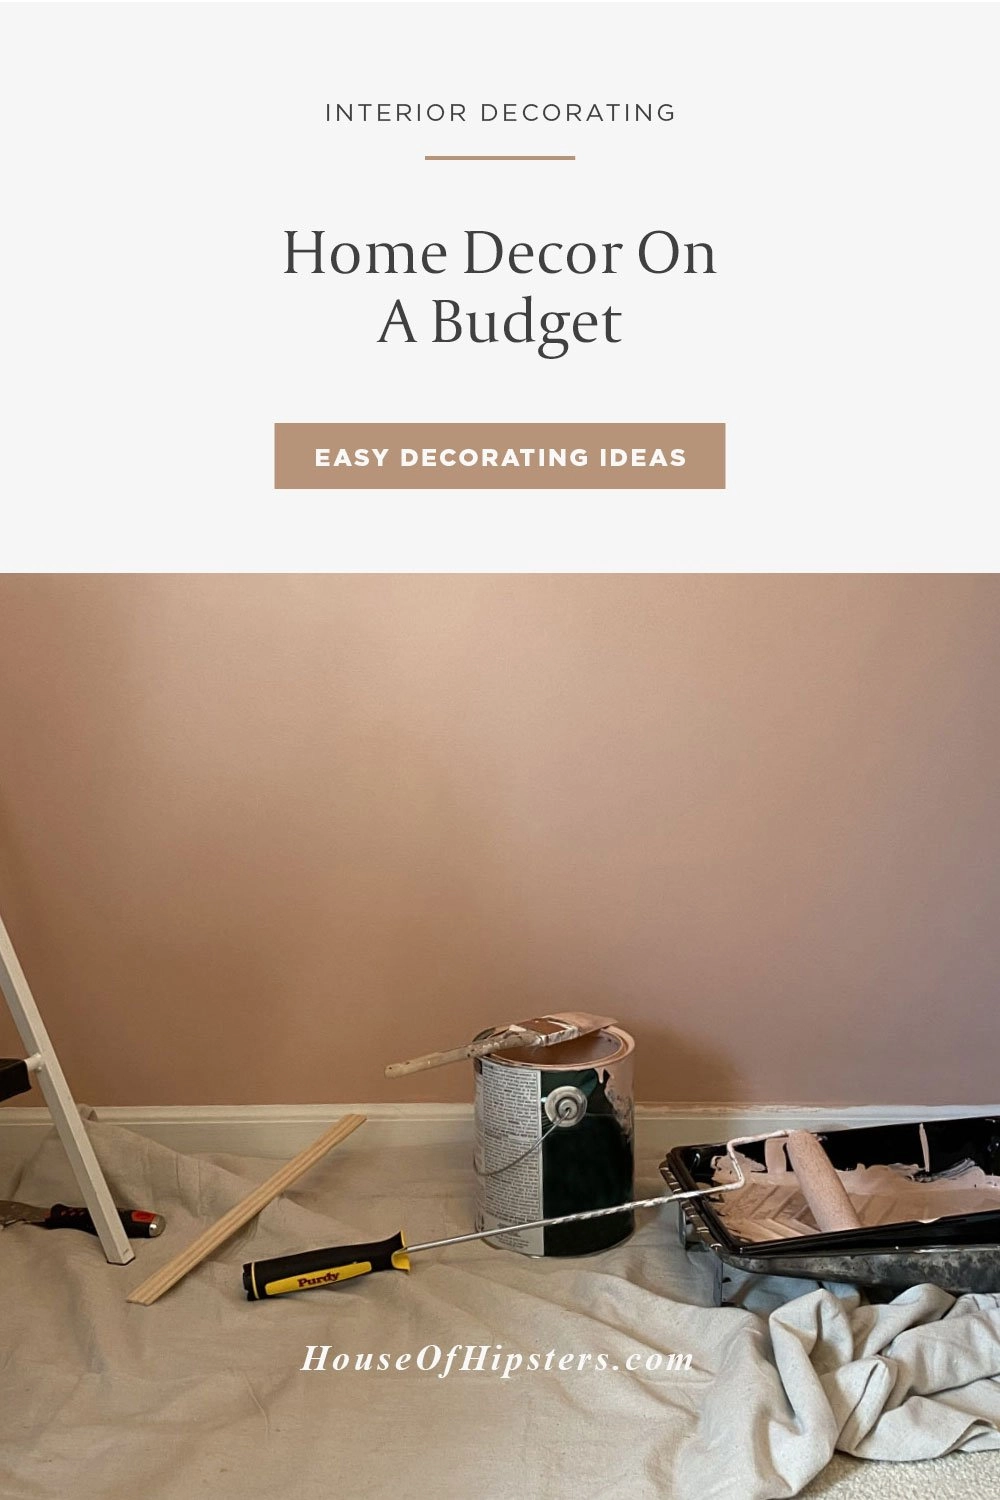 Home Decor on a Budget - 9 ways to add elegance to a room but stay within a tight budget: add a fresh coat of paint, add architectural details, paint your doors, add unique lighting, shop second hand and thrifts shops, rearrange the furniture in your home, clean and organize, add a mirror,